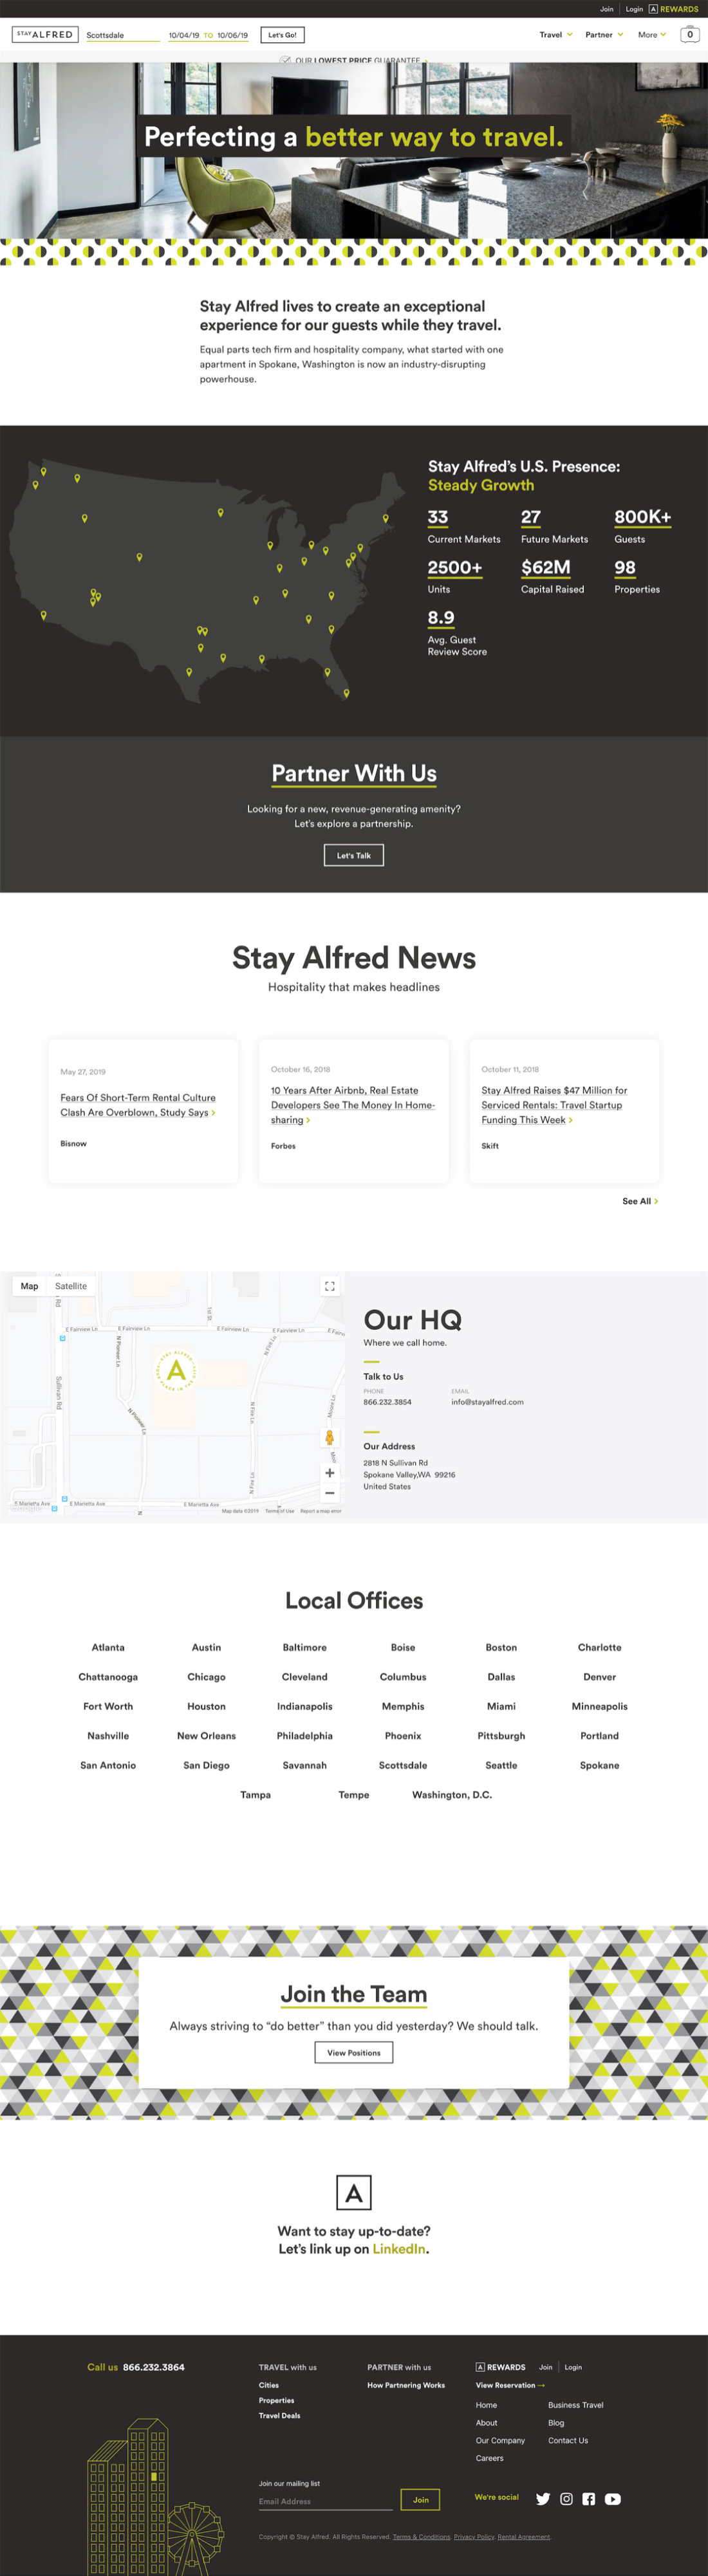 Stay Alfred Company Page V2